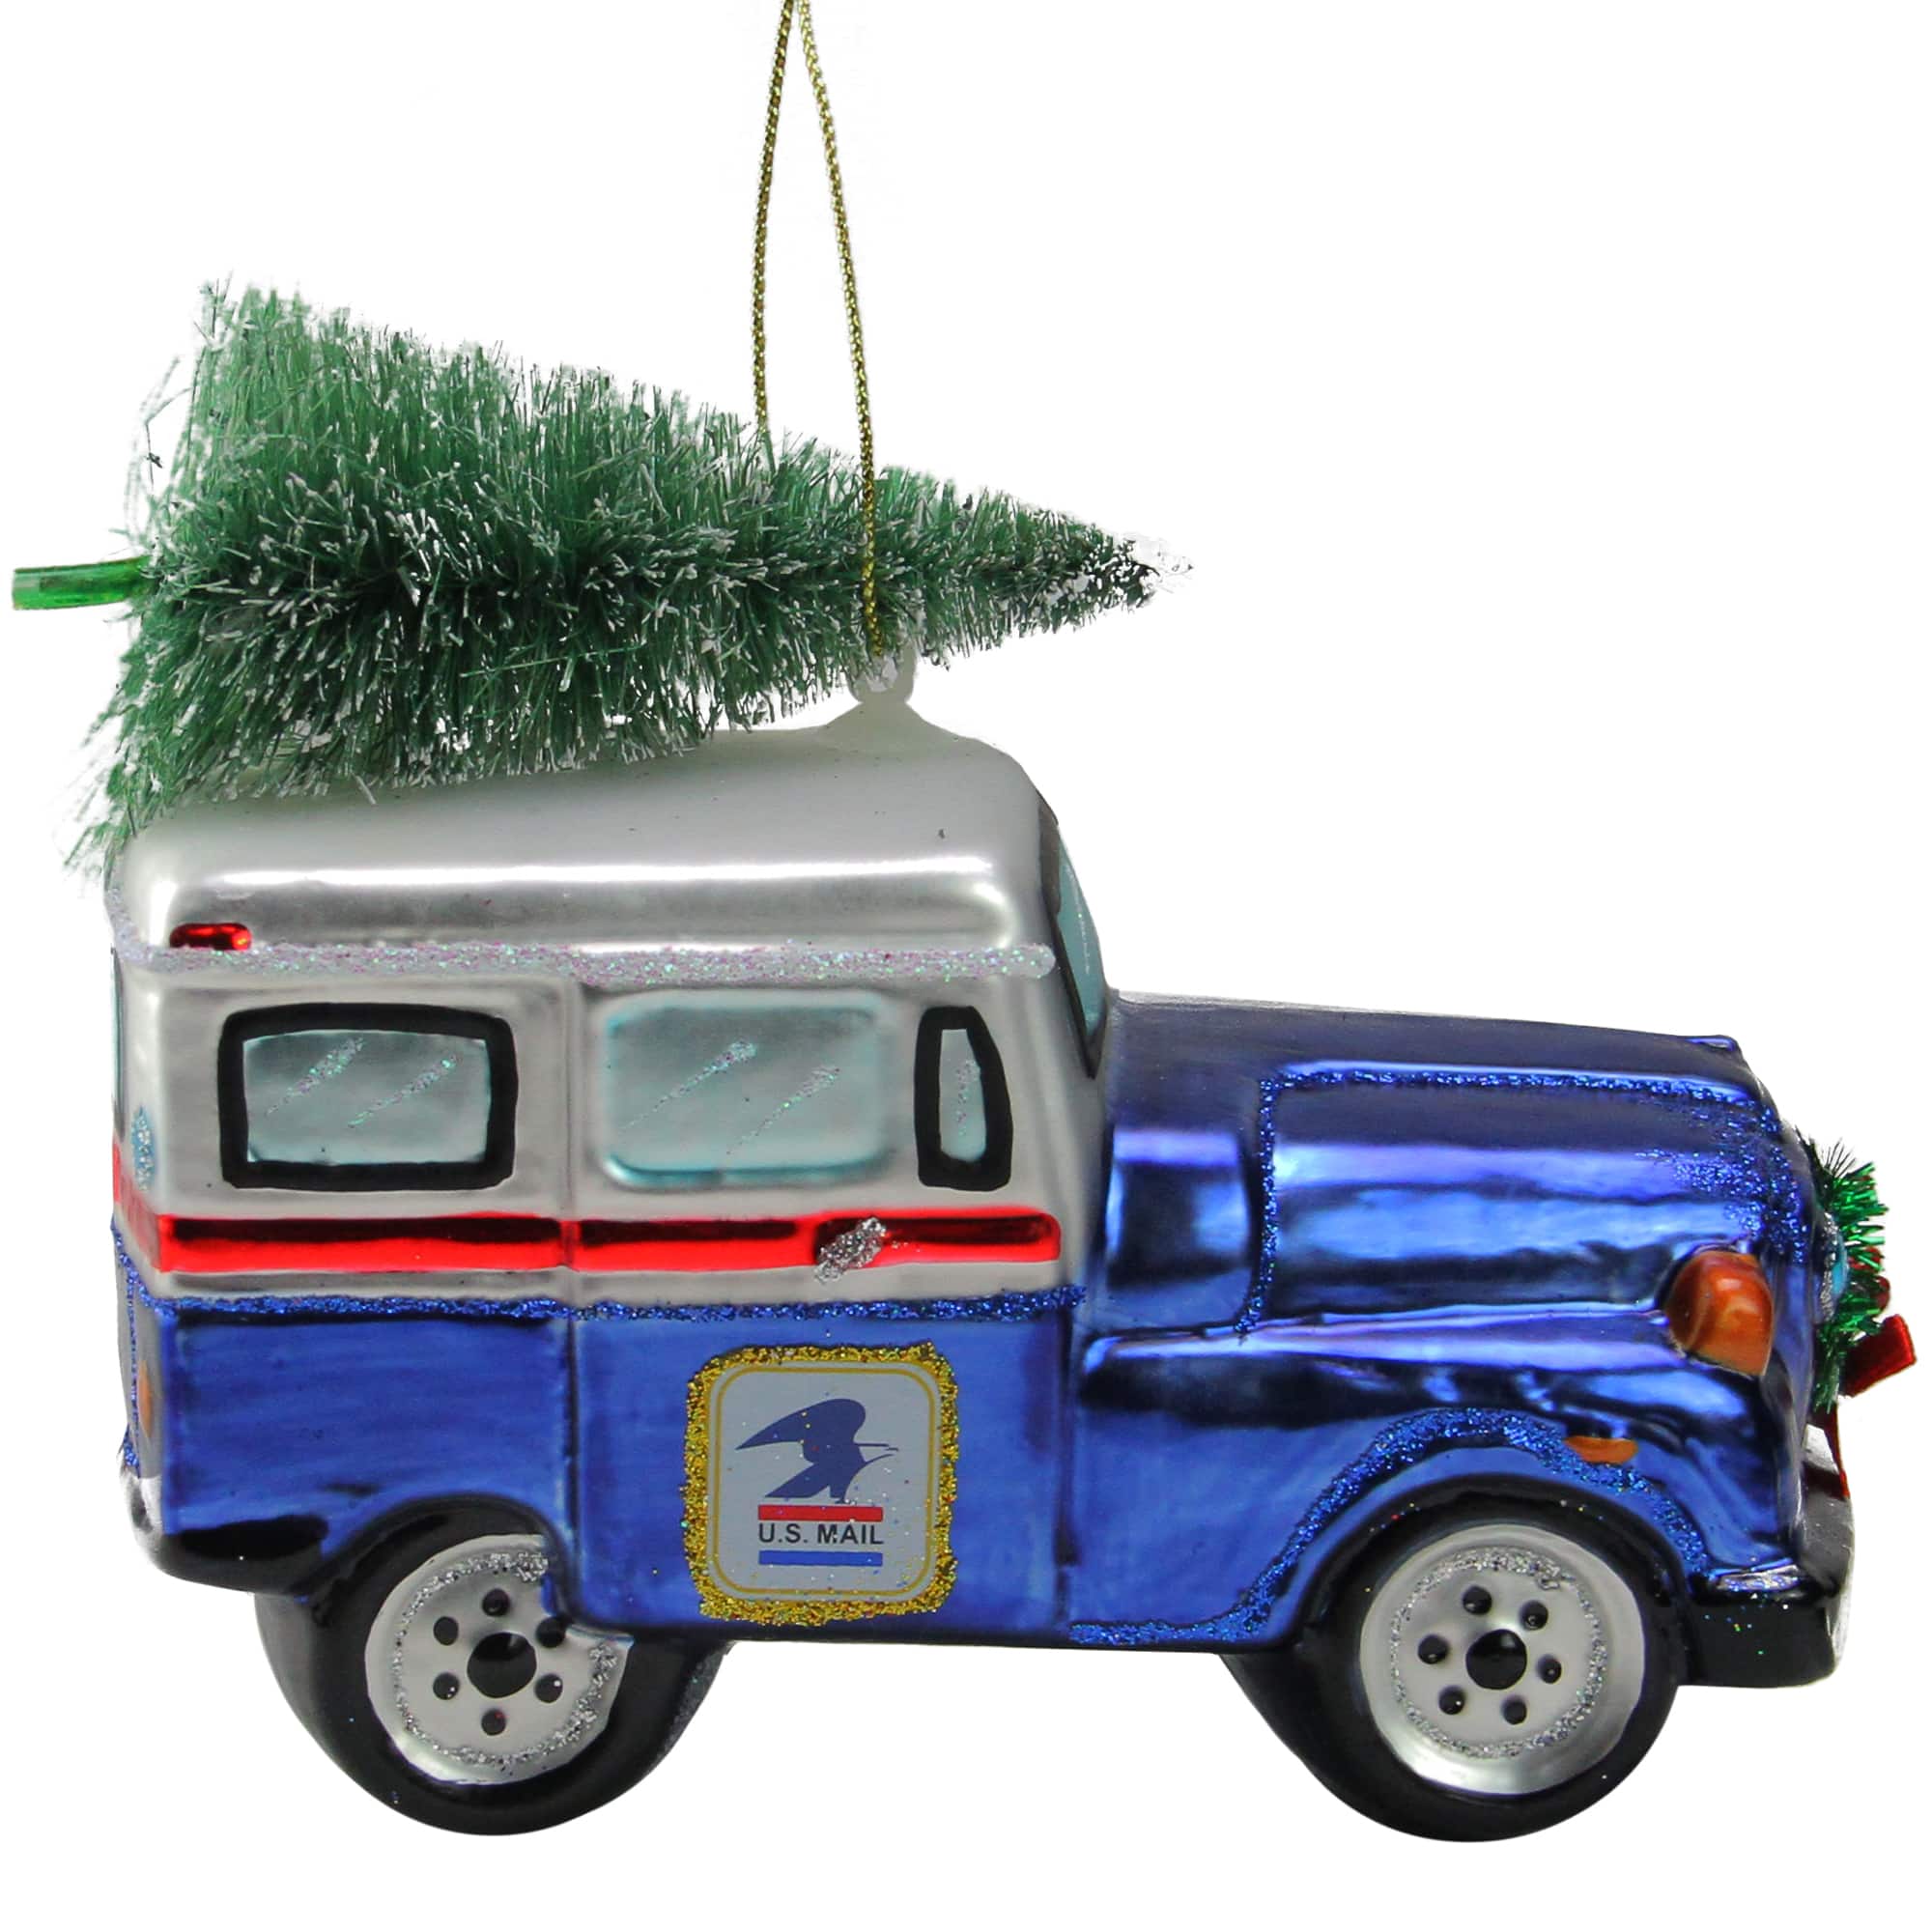 Postal Worker Mail Truck Christmas Tree Graphic by Kerdell · Creative  Fabrica